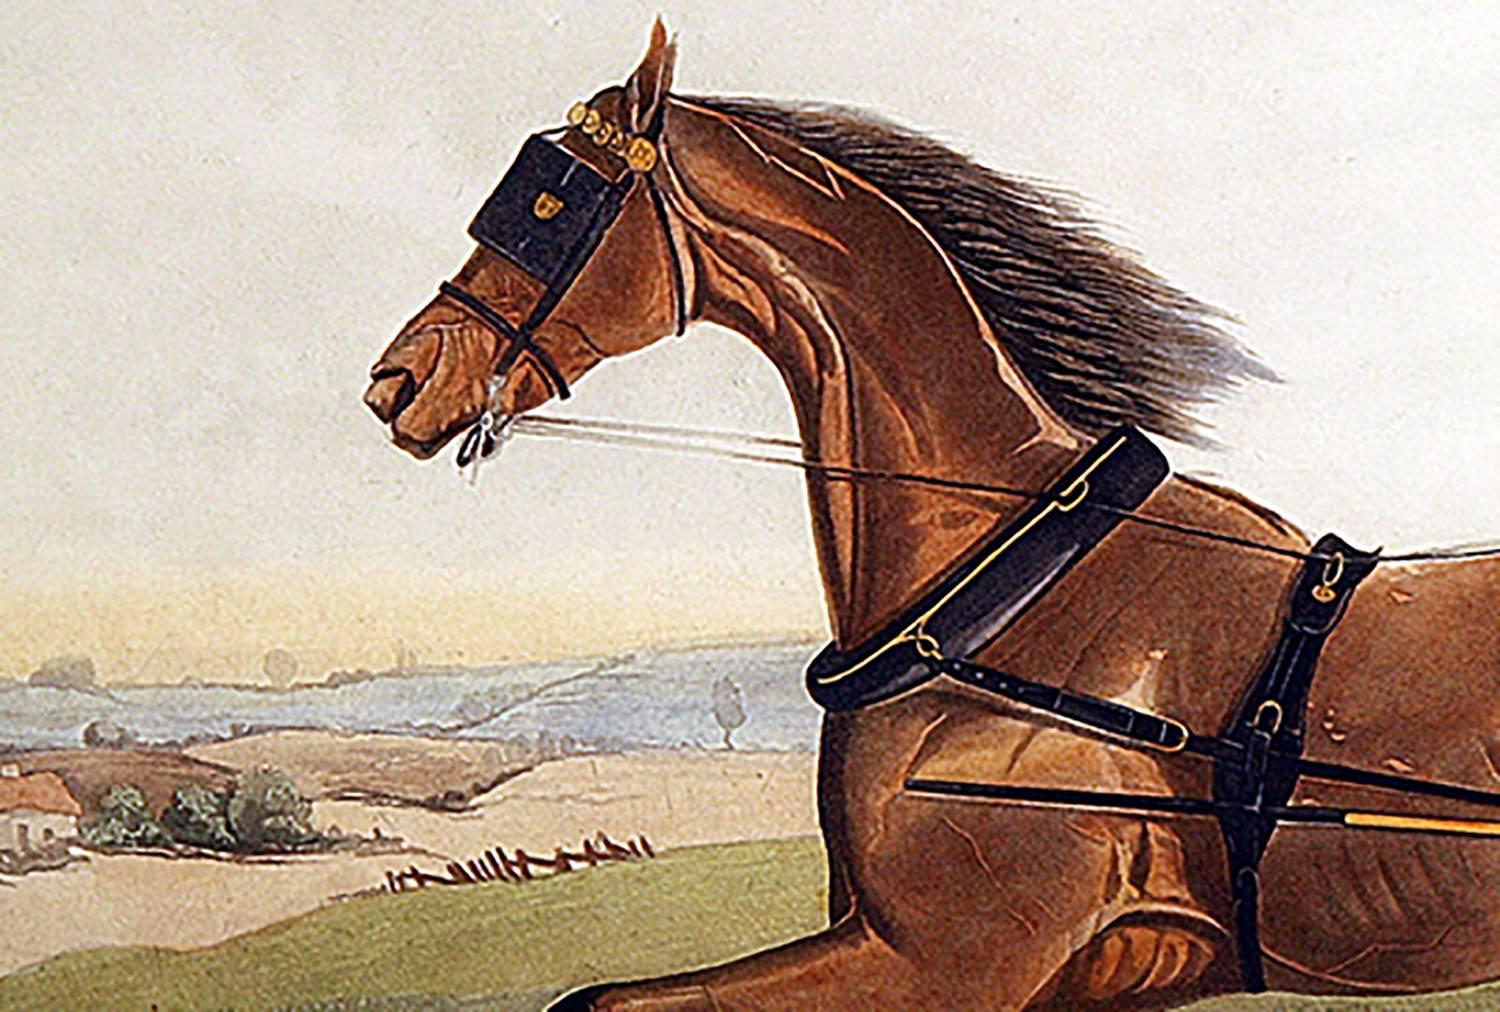 Trotter in the English Countryside - Print by J. R. Mackrell